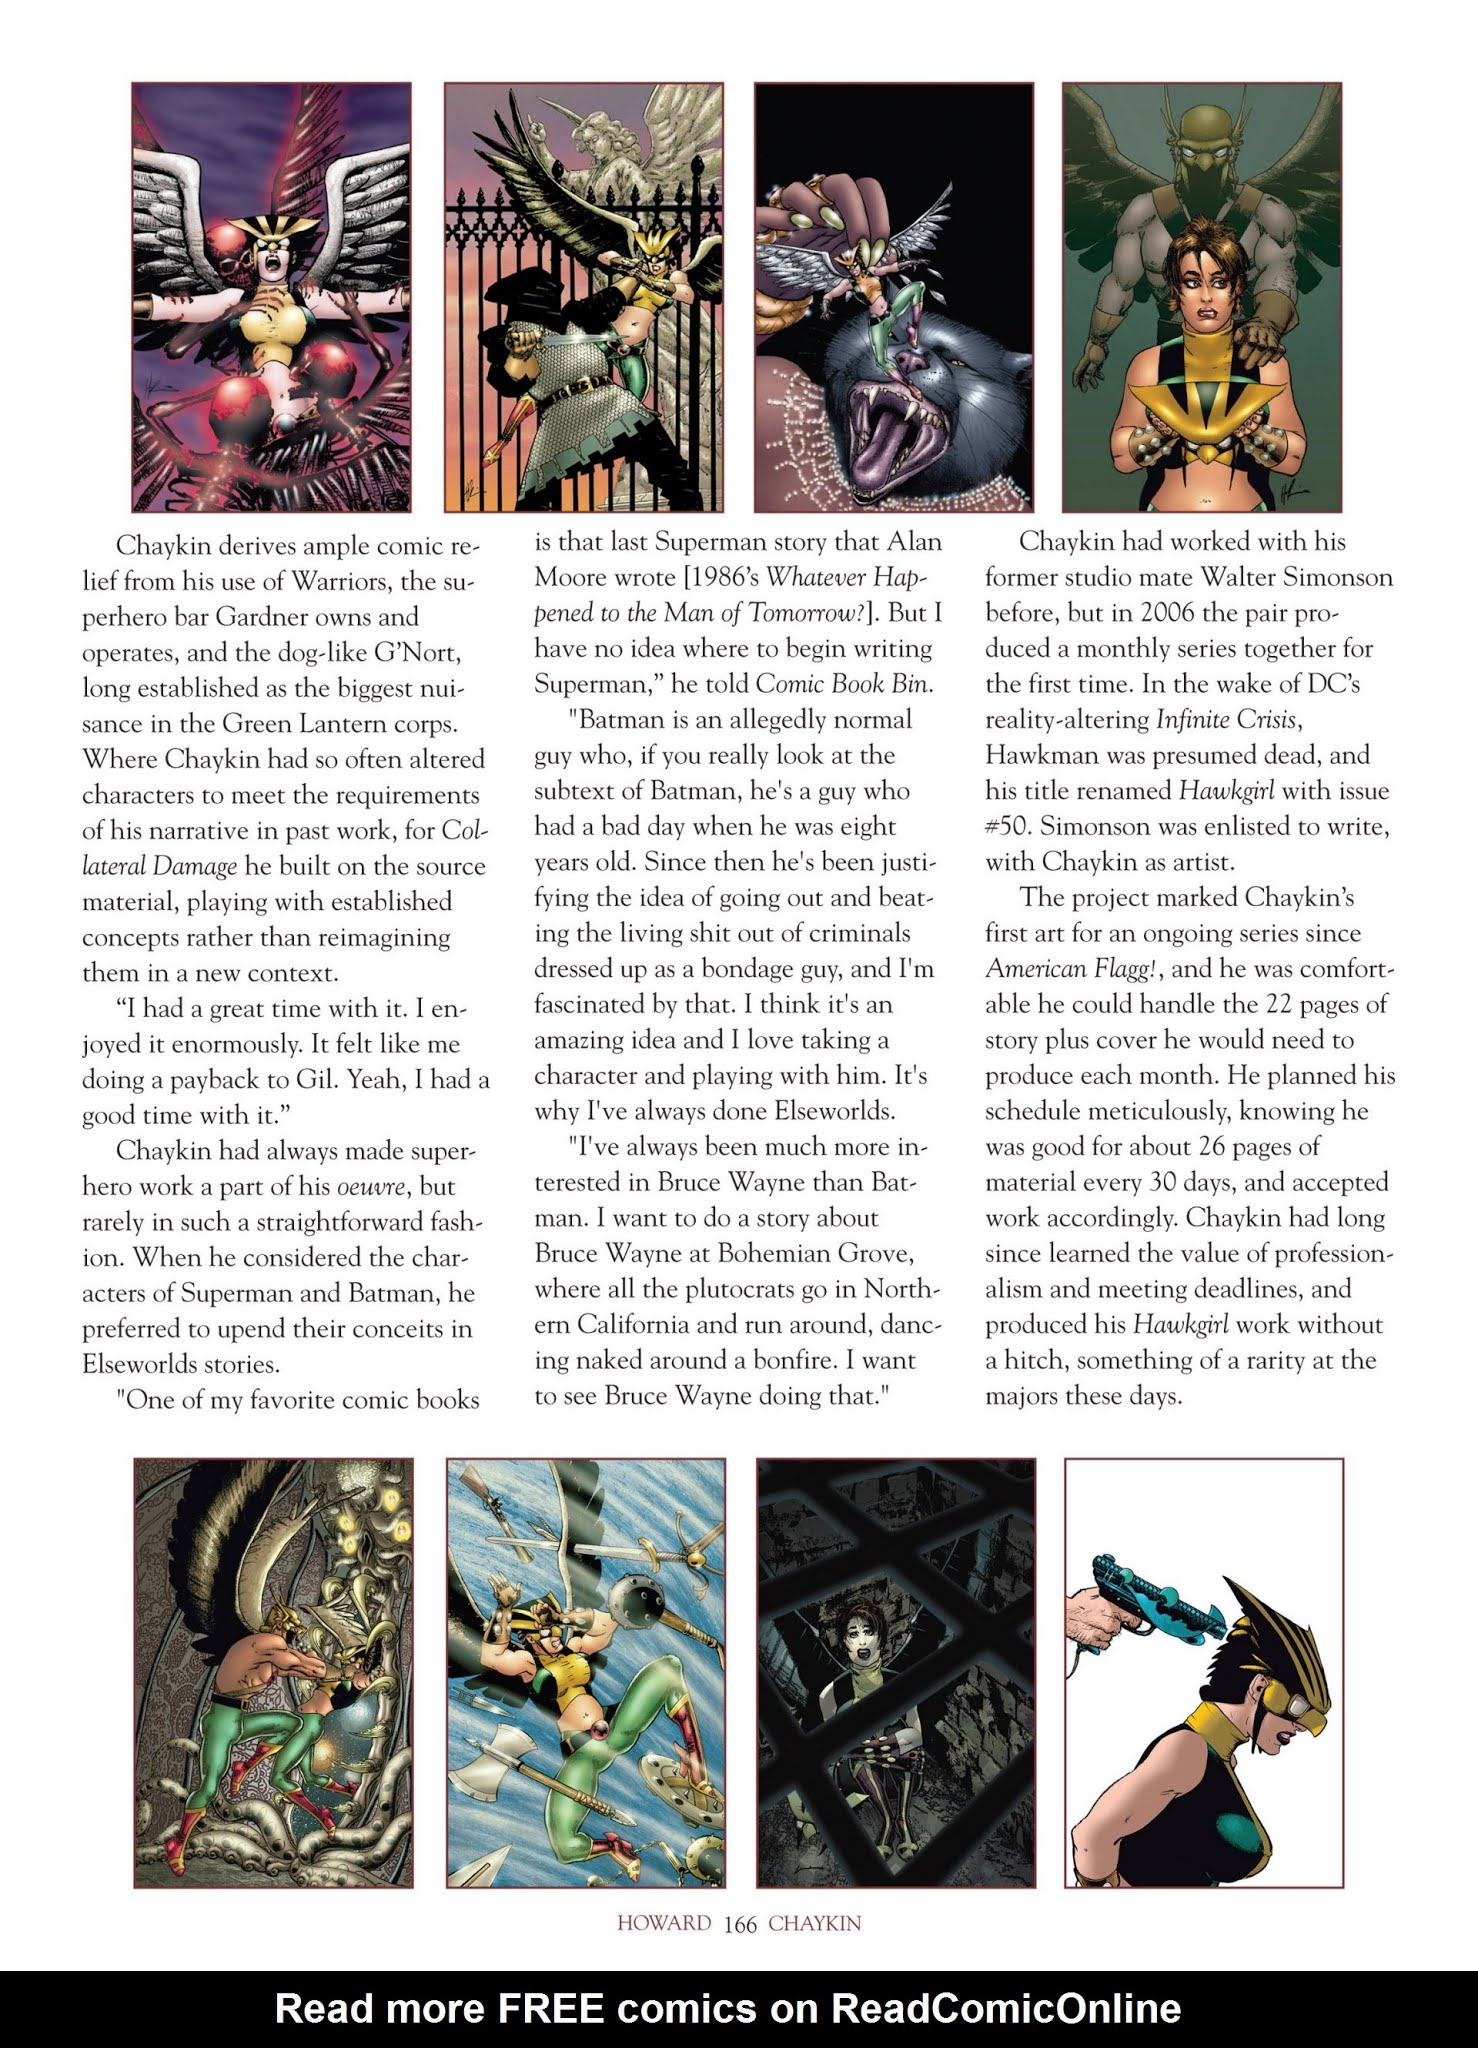 Read online The Art of Howard Chaykin comic -  Issue # TPB (Part 2) - 66